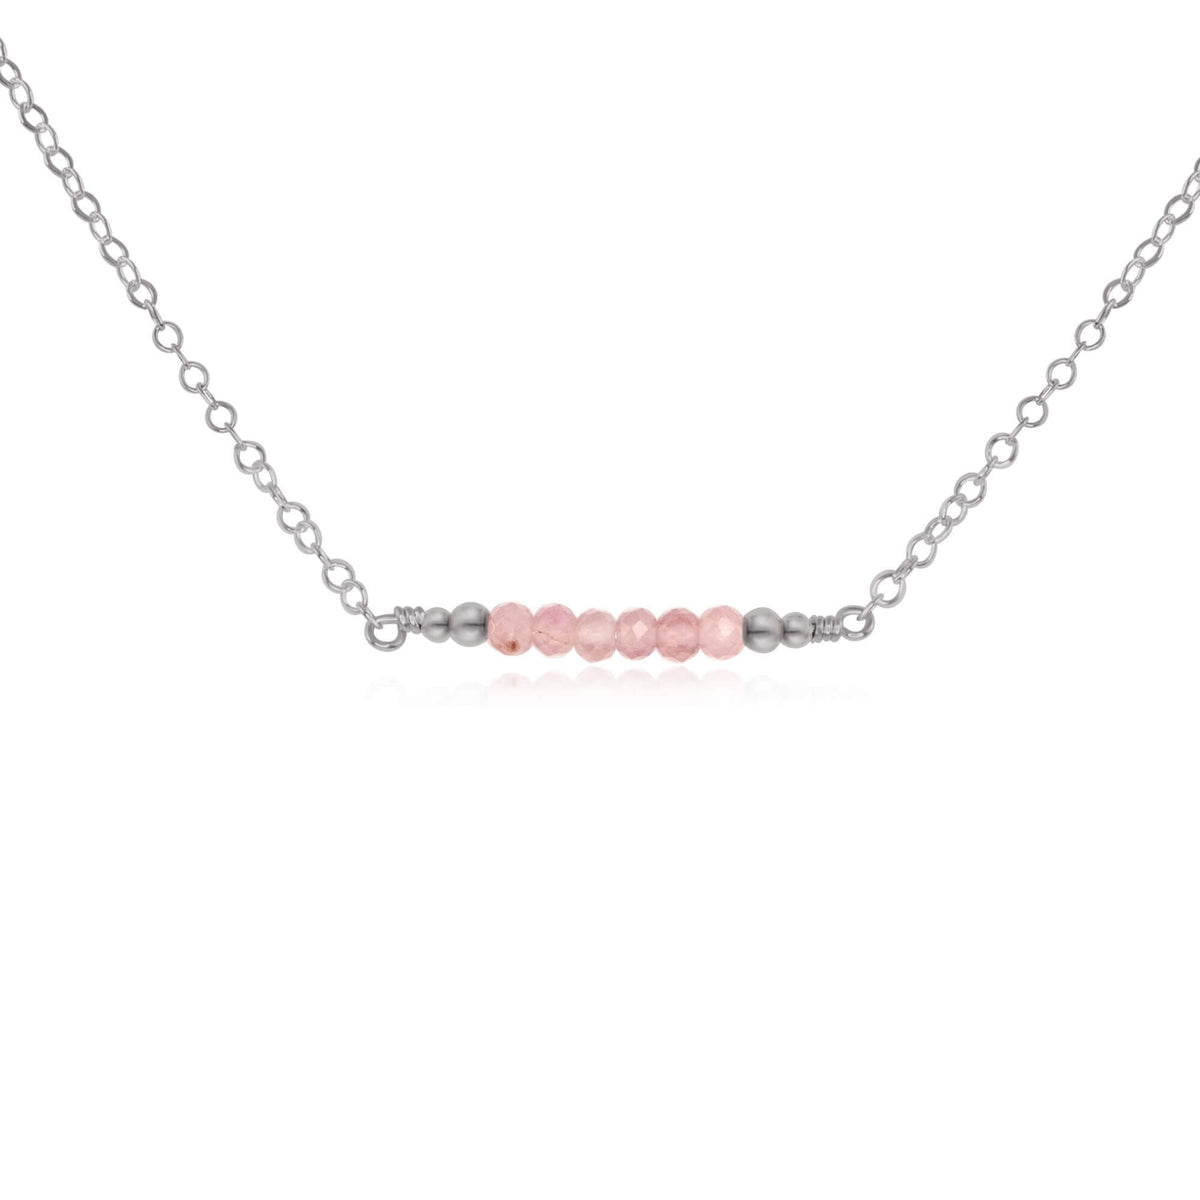 Faceted Bead Bar Necklace - Rose Quartz - Stainless Steel - Luna Tide Handmade Jewellery